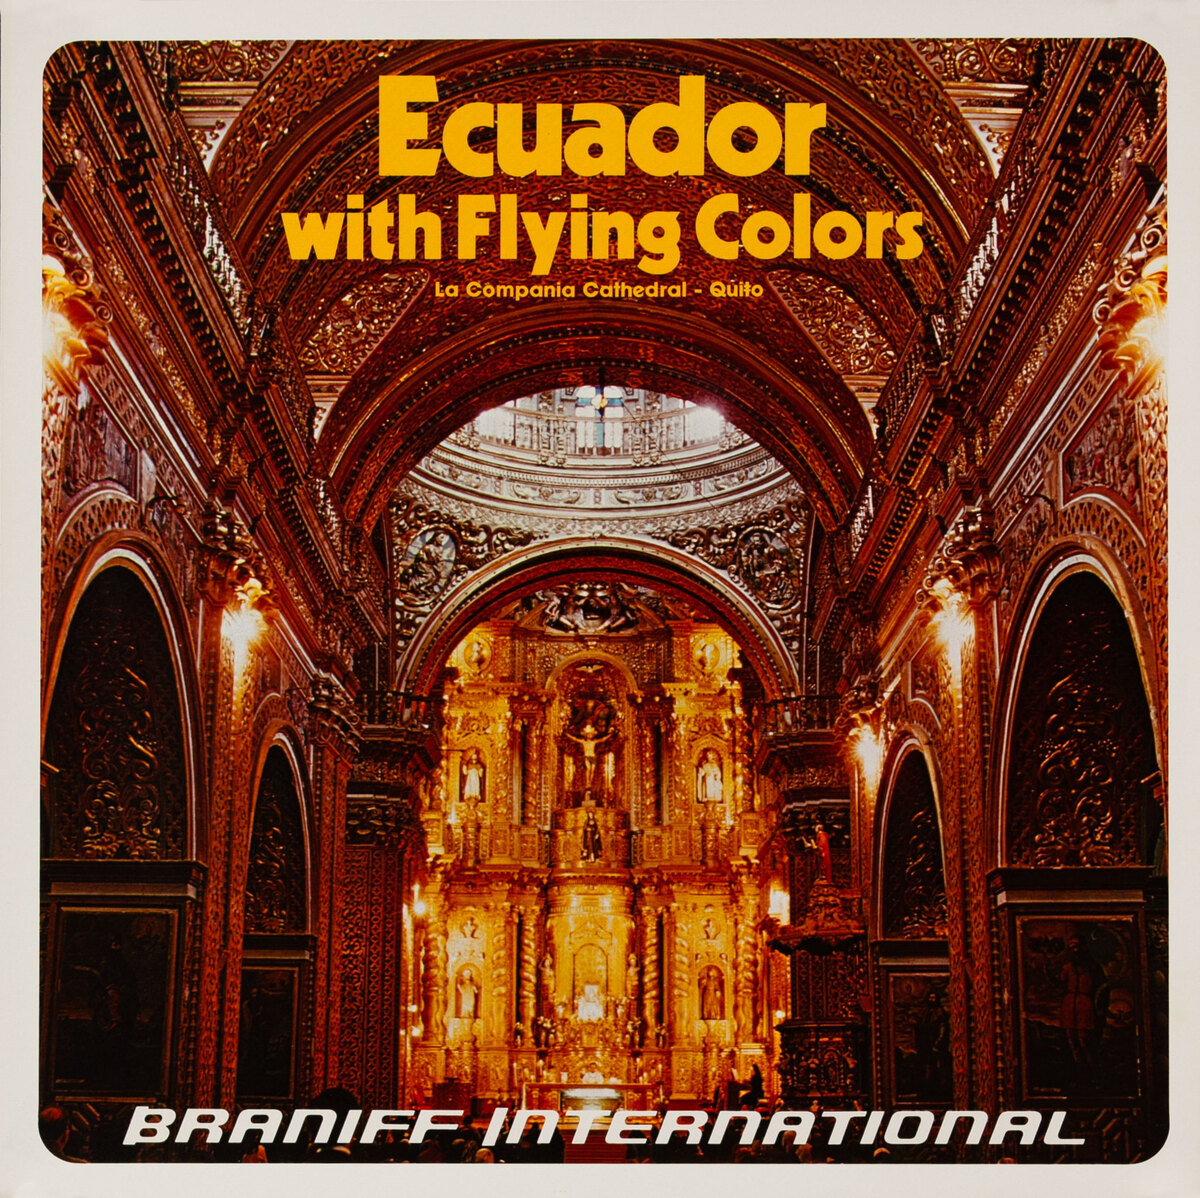 Braniff International - Ecuador With Flying Colors - La Company Cathedral - Quito